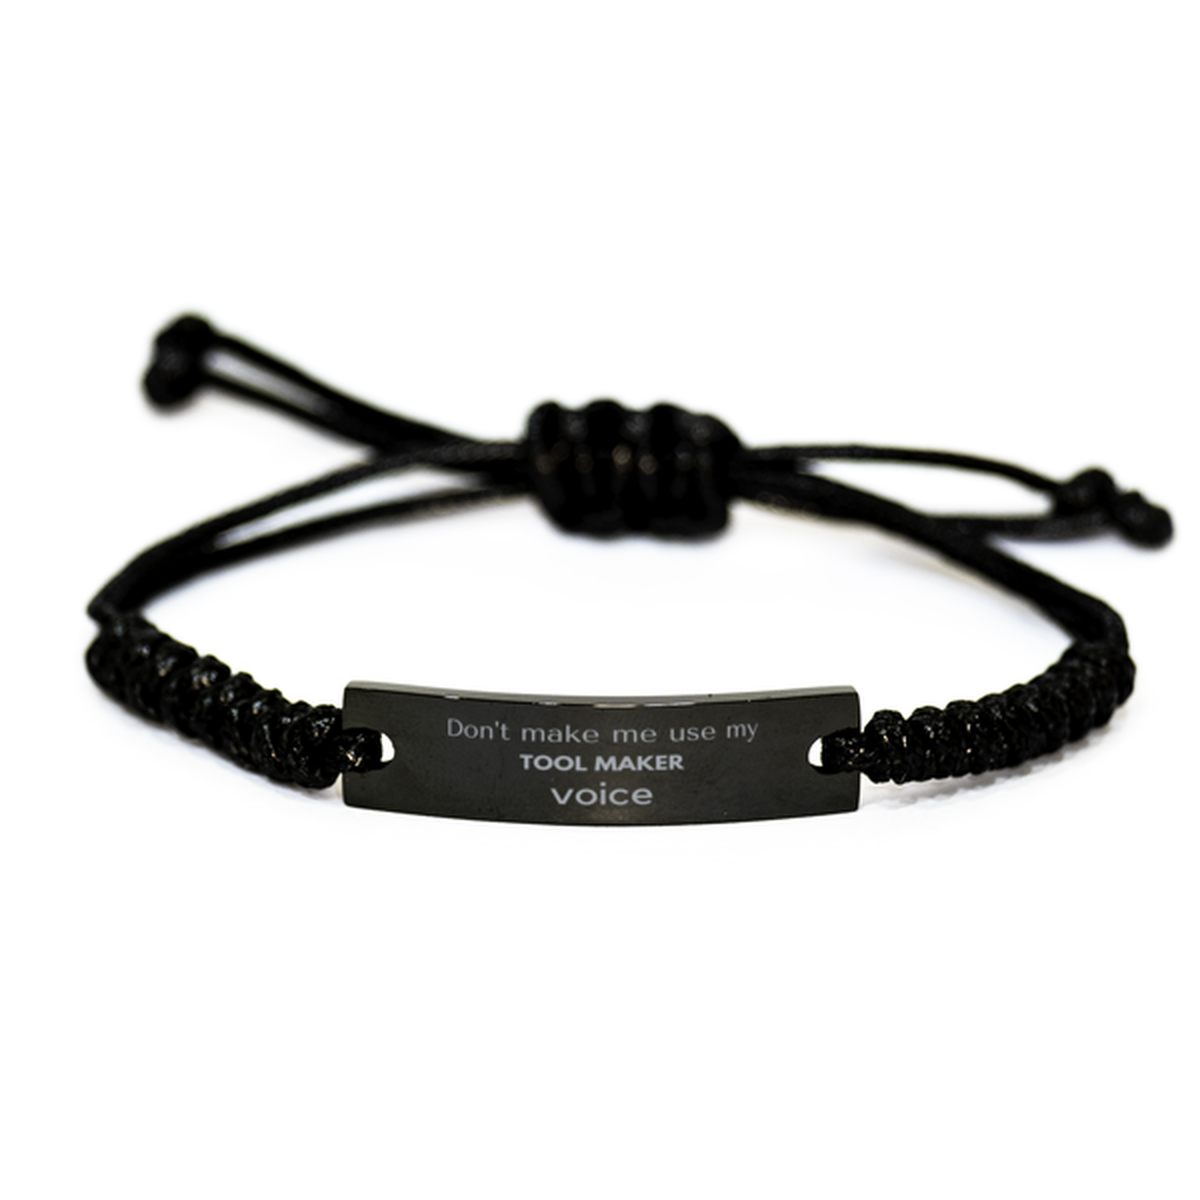 Don't make me use my Tool Maker voice, Sarcasm Tool Maker Gifts, Christmas Tool Maker Black Rope Bracelet Birthday Unique Gifts For Tool Maker Coworkers, Men, Women, Colleague, Friends